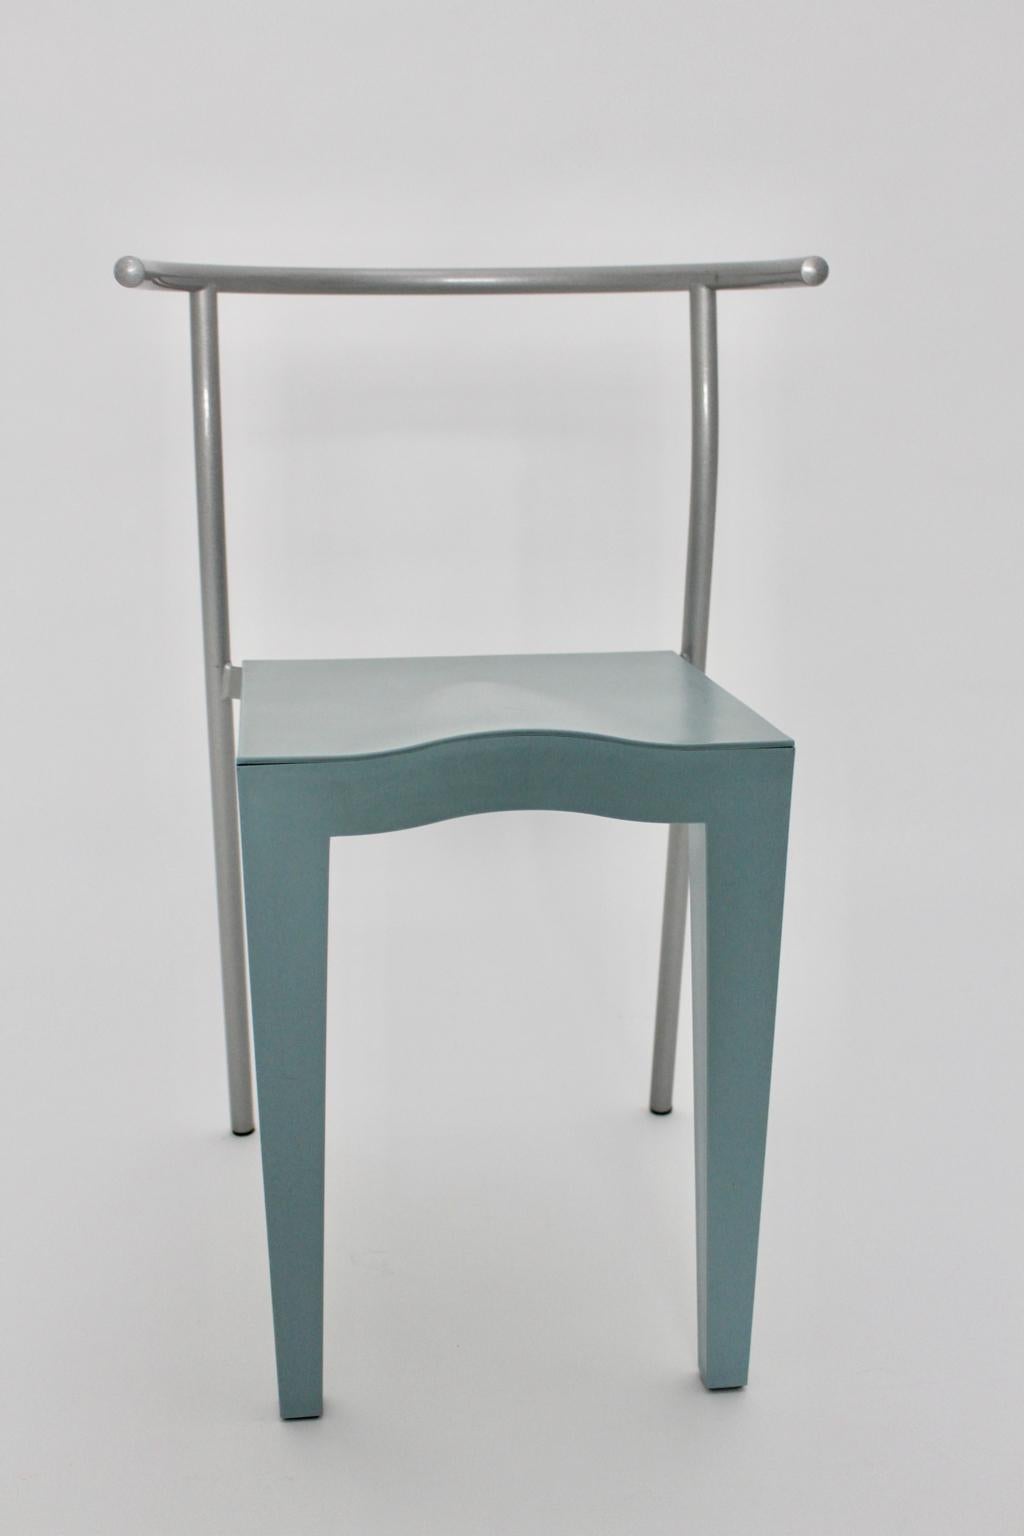 Postmodern light blue vintage chair was designed by Philippe Starck in the 1980s and executed by Kartell Italy.
The chair shows grey lacquered tube steel feet furthermore the seat and back were made of light-blue propylen.
Very good vintage